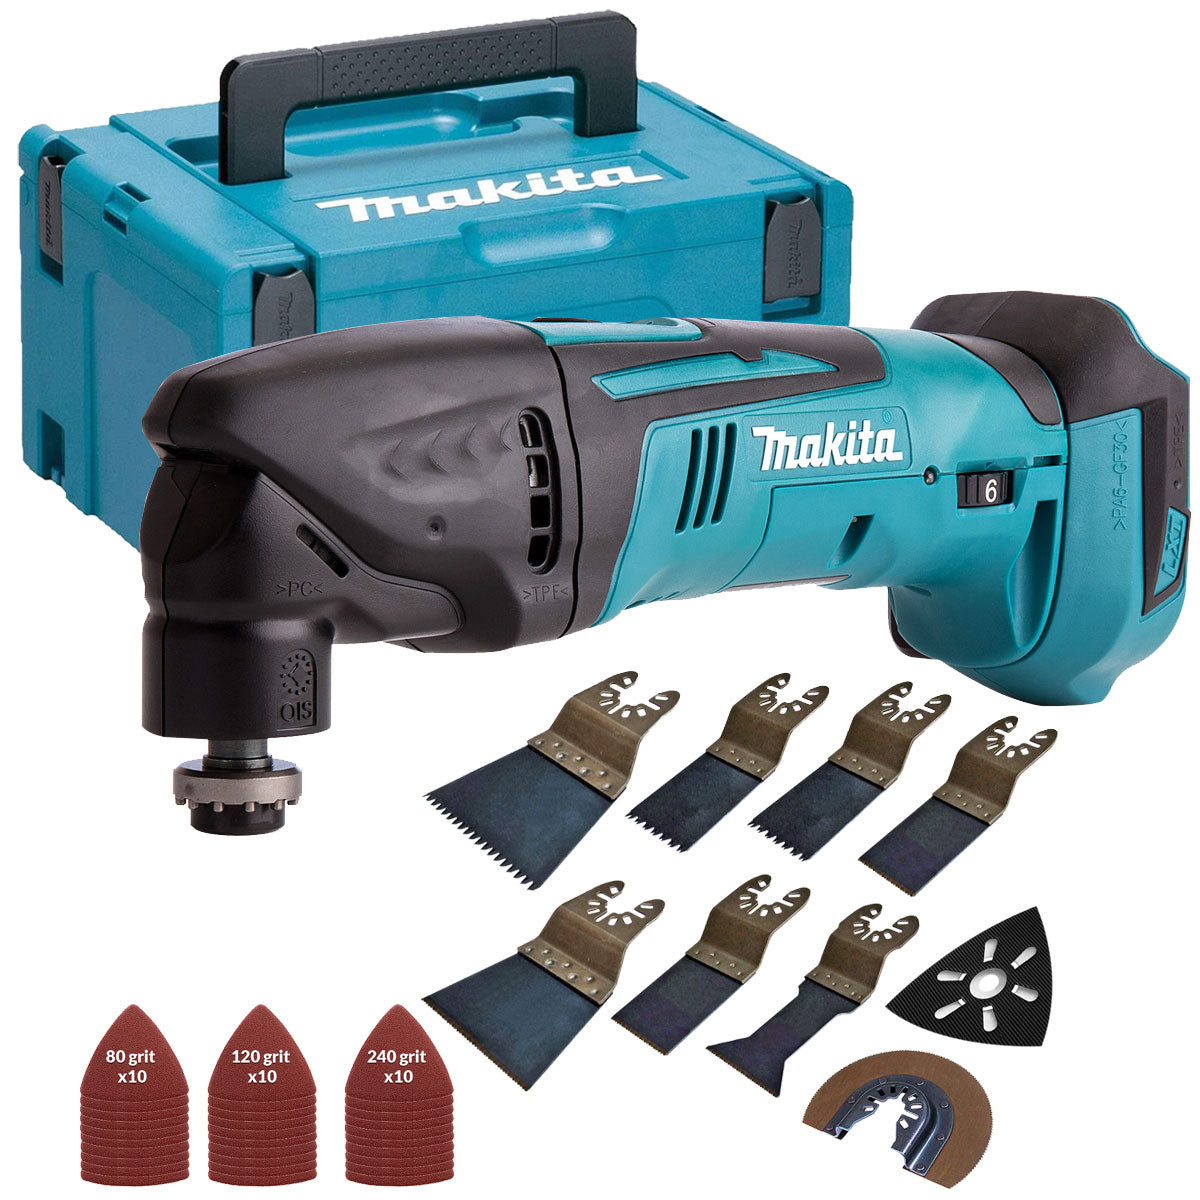 Makita DTM50Z LXT 18V Oscillating Multitool with 39 Piece Accessories Set & MakCase